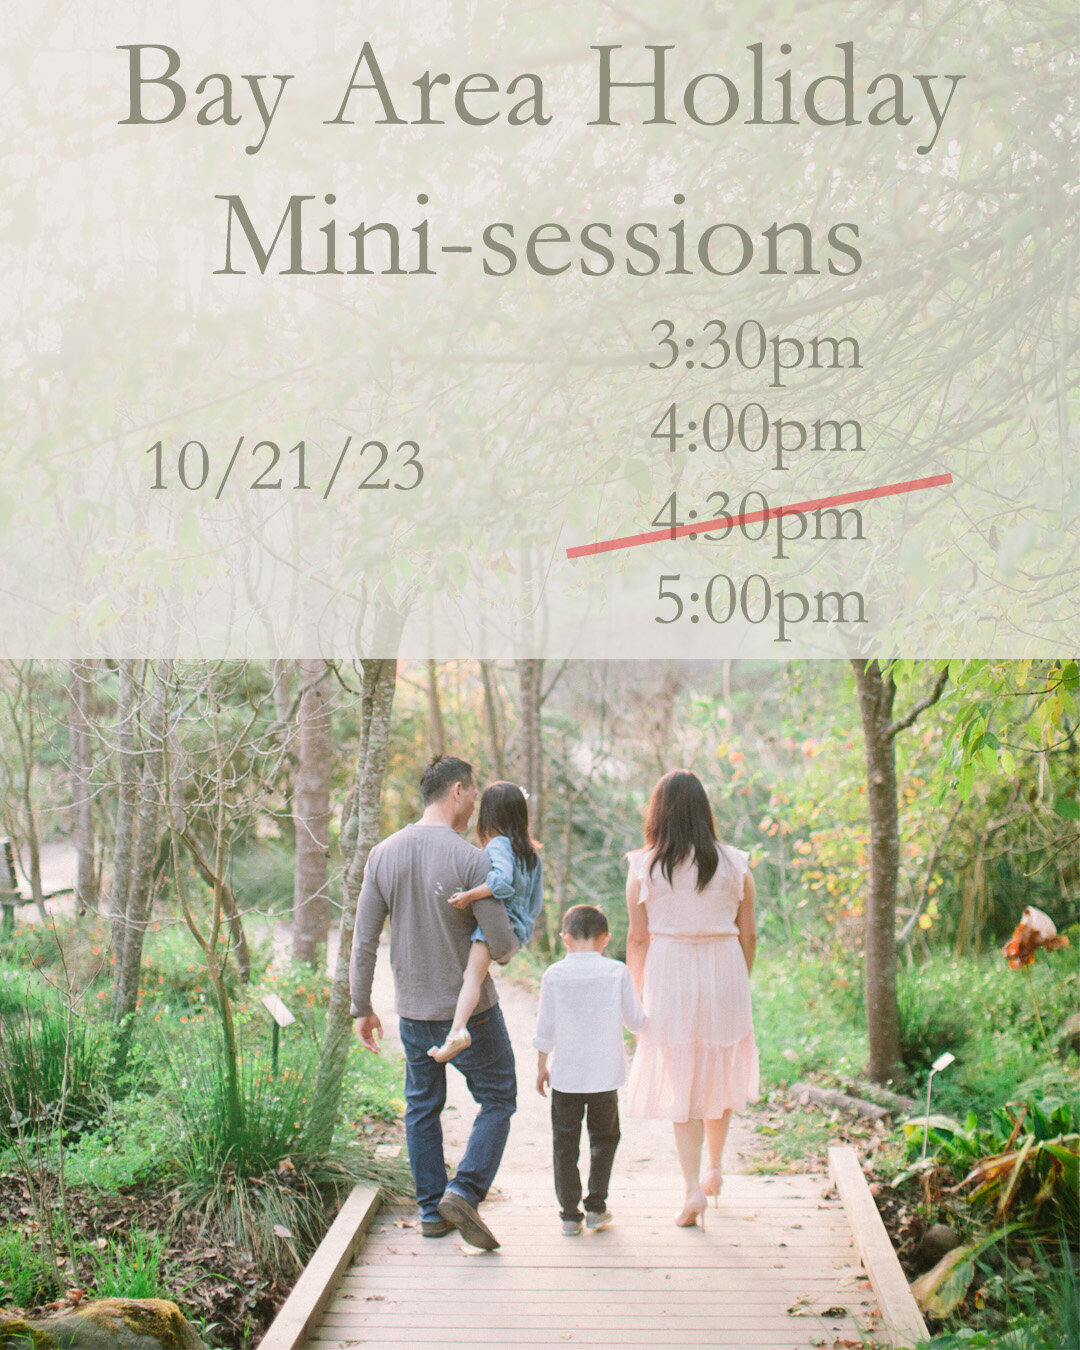 We are headed back to the Bay Area this October and will hosting a mini-session day on October 21st. Only 3 spots left! DM or email us for more details. 

Mini sessions include 
20 Minutes
20 photos